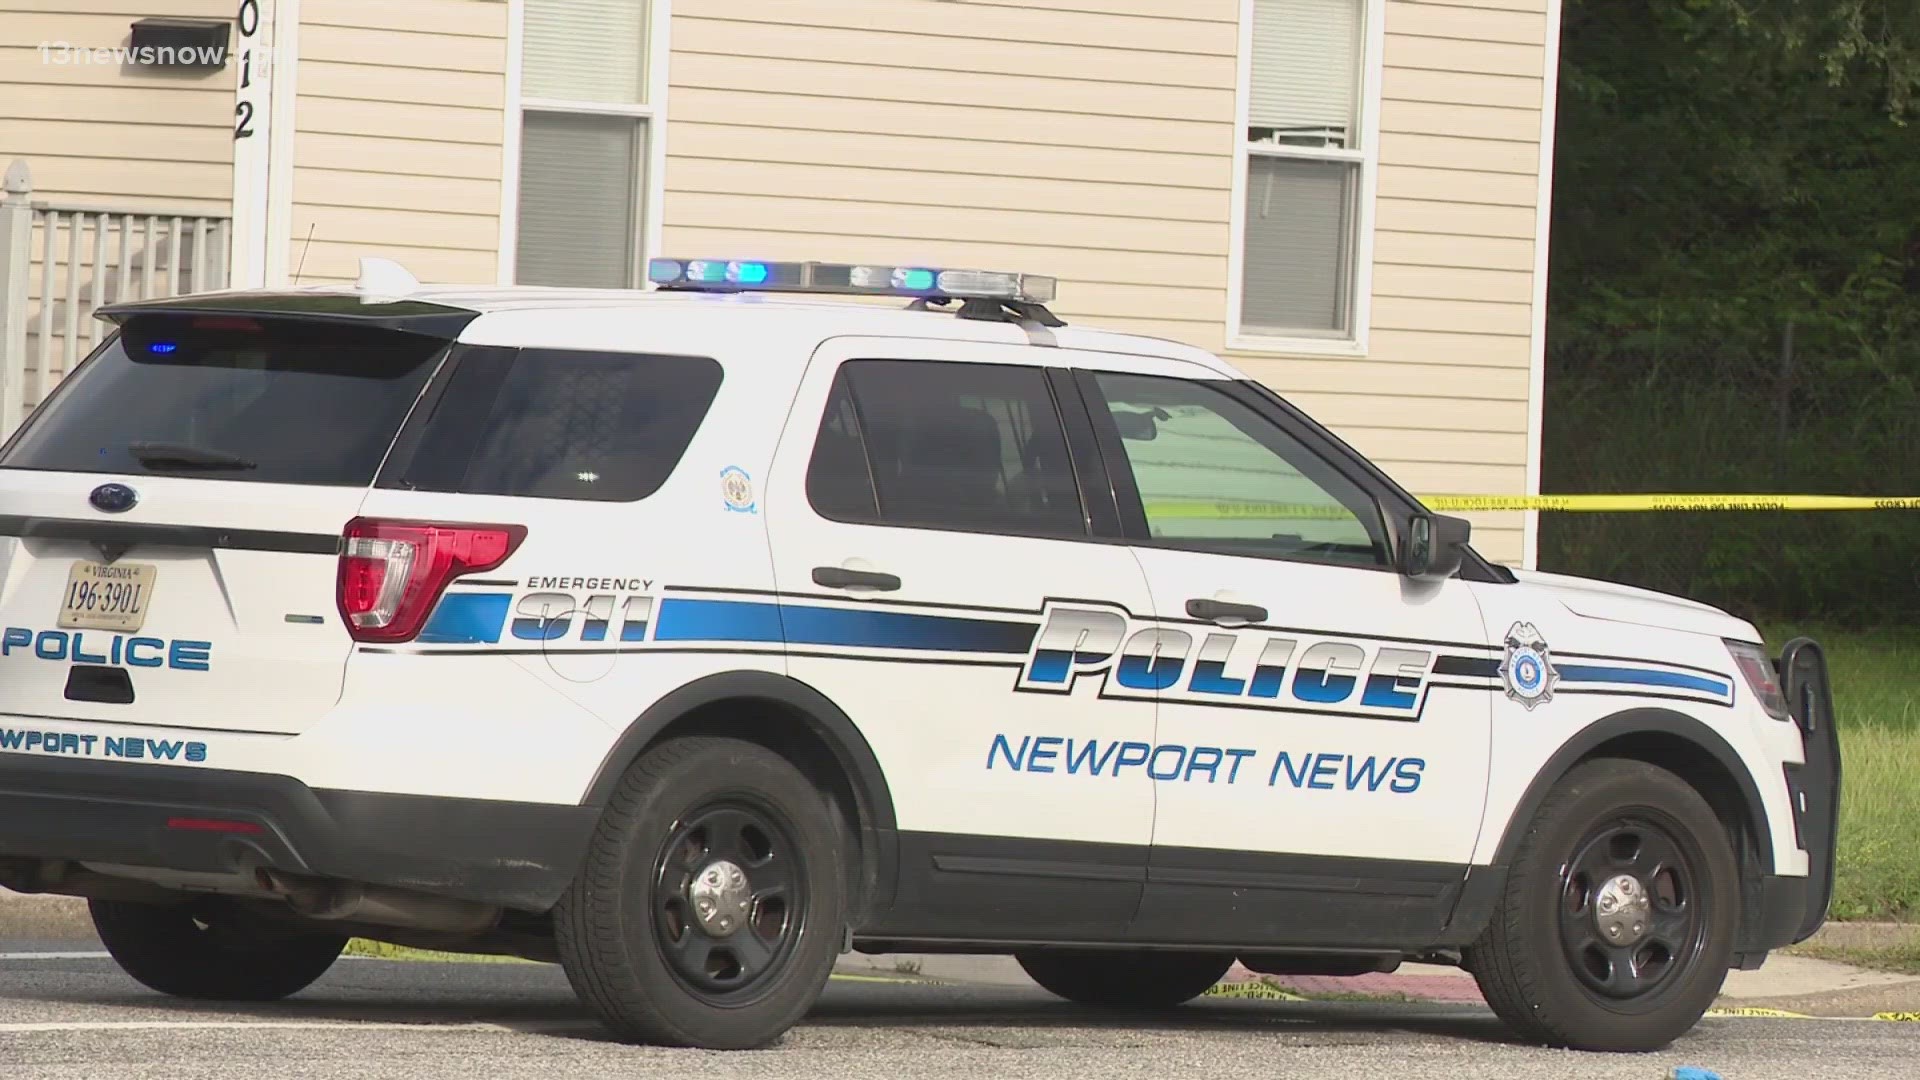 According to the Newport News Police Department, officers responded to 41st Street near Roanoke Avenue just before 2:15 p.m.